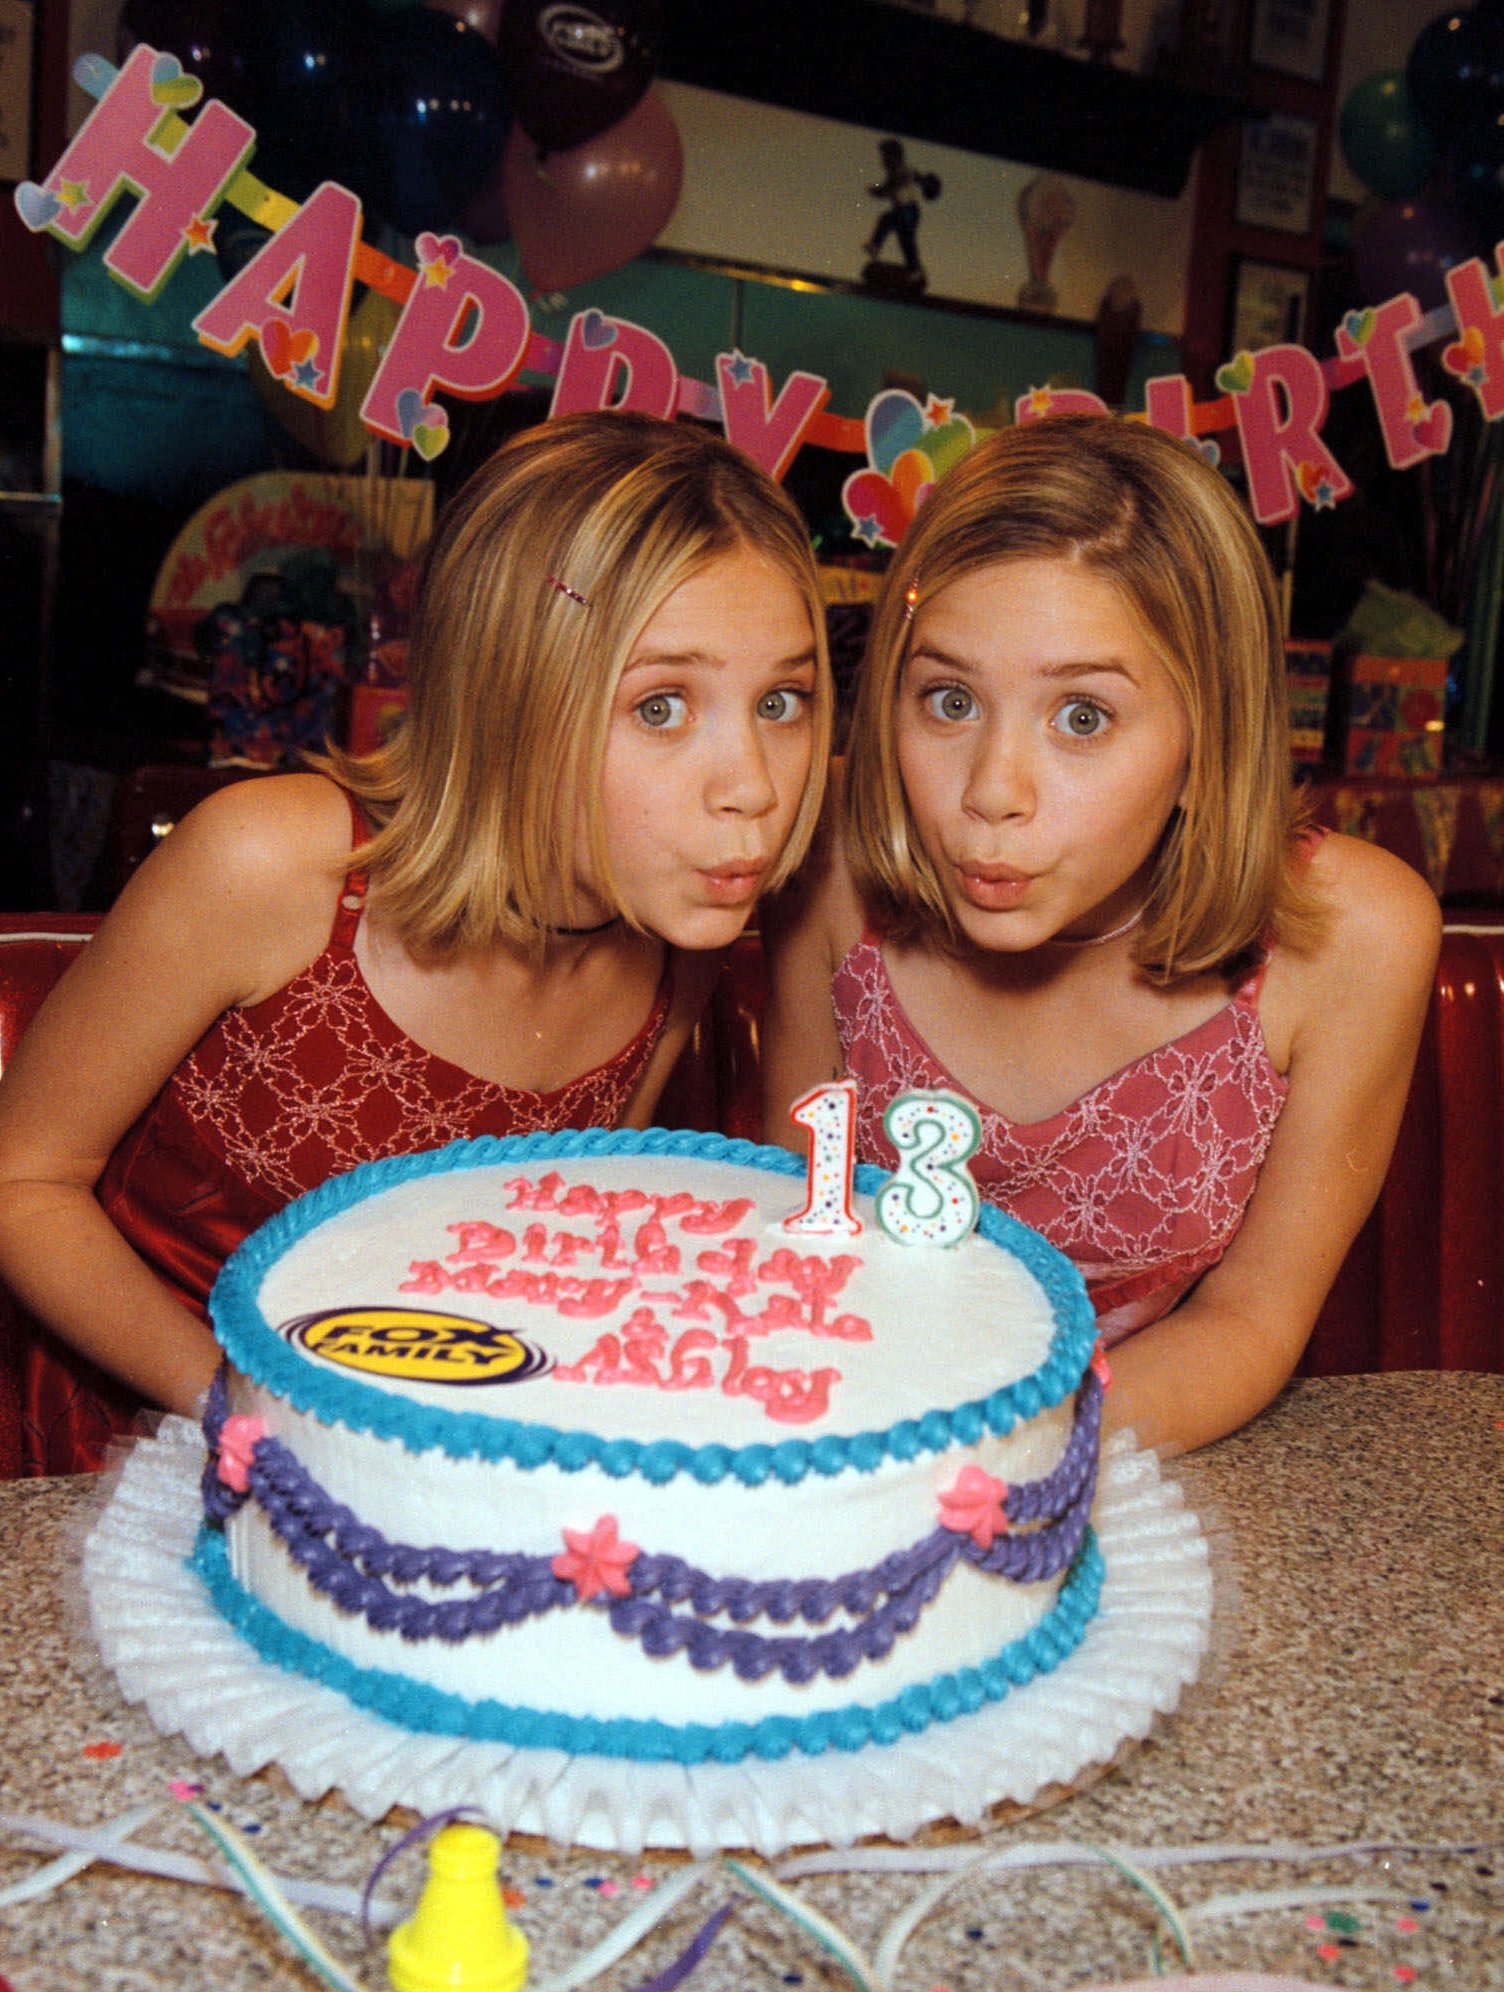 Mary-Kate and Ashley have recently stayed out of the spotlight after having a full career in Hollywood throughout their younger years